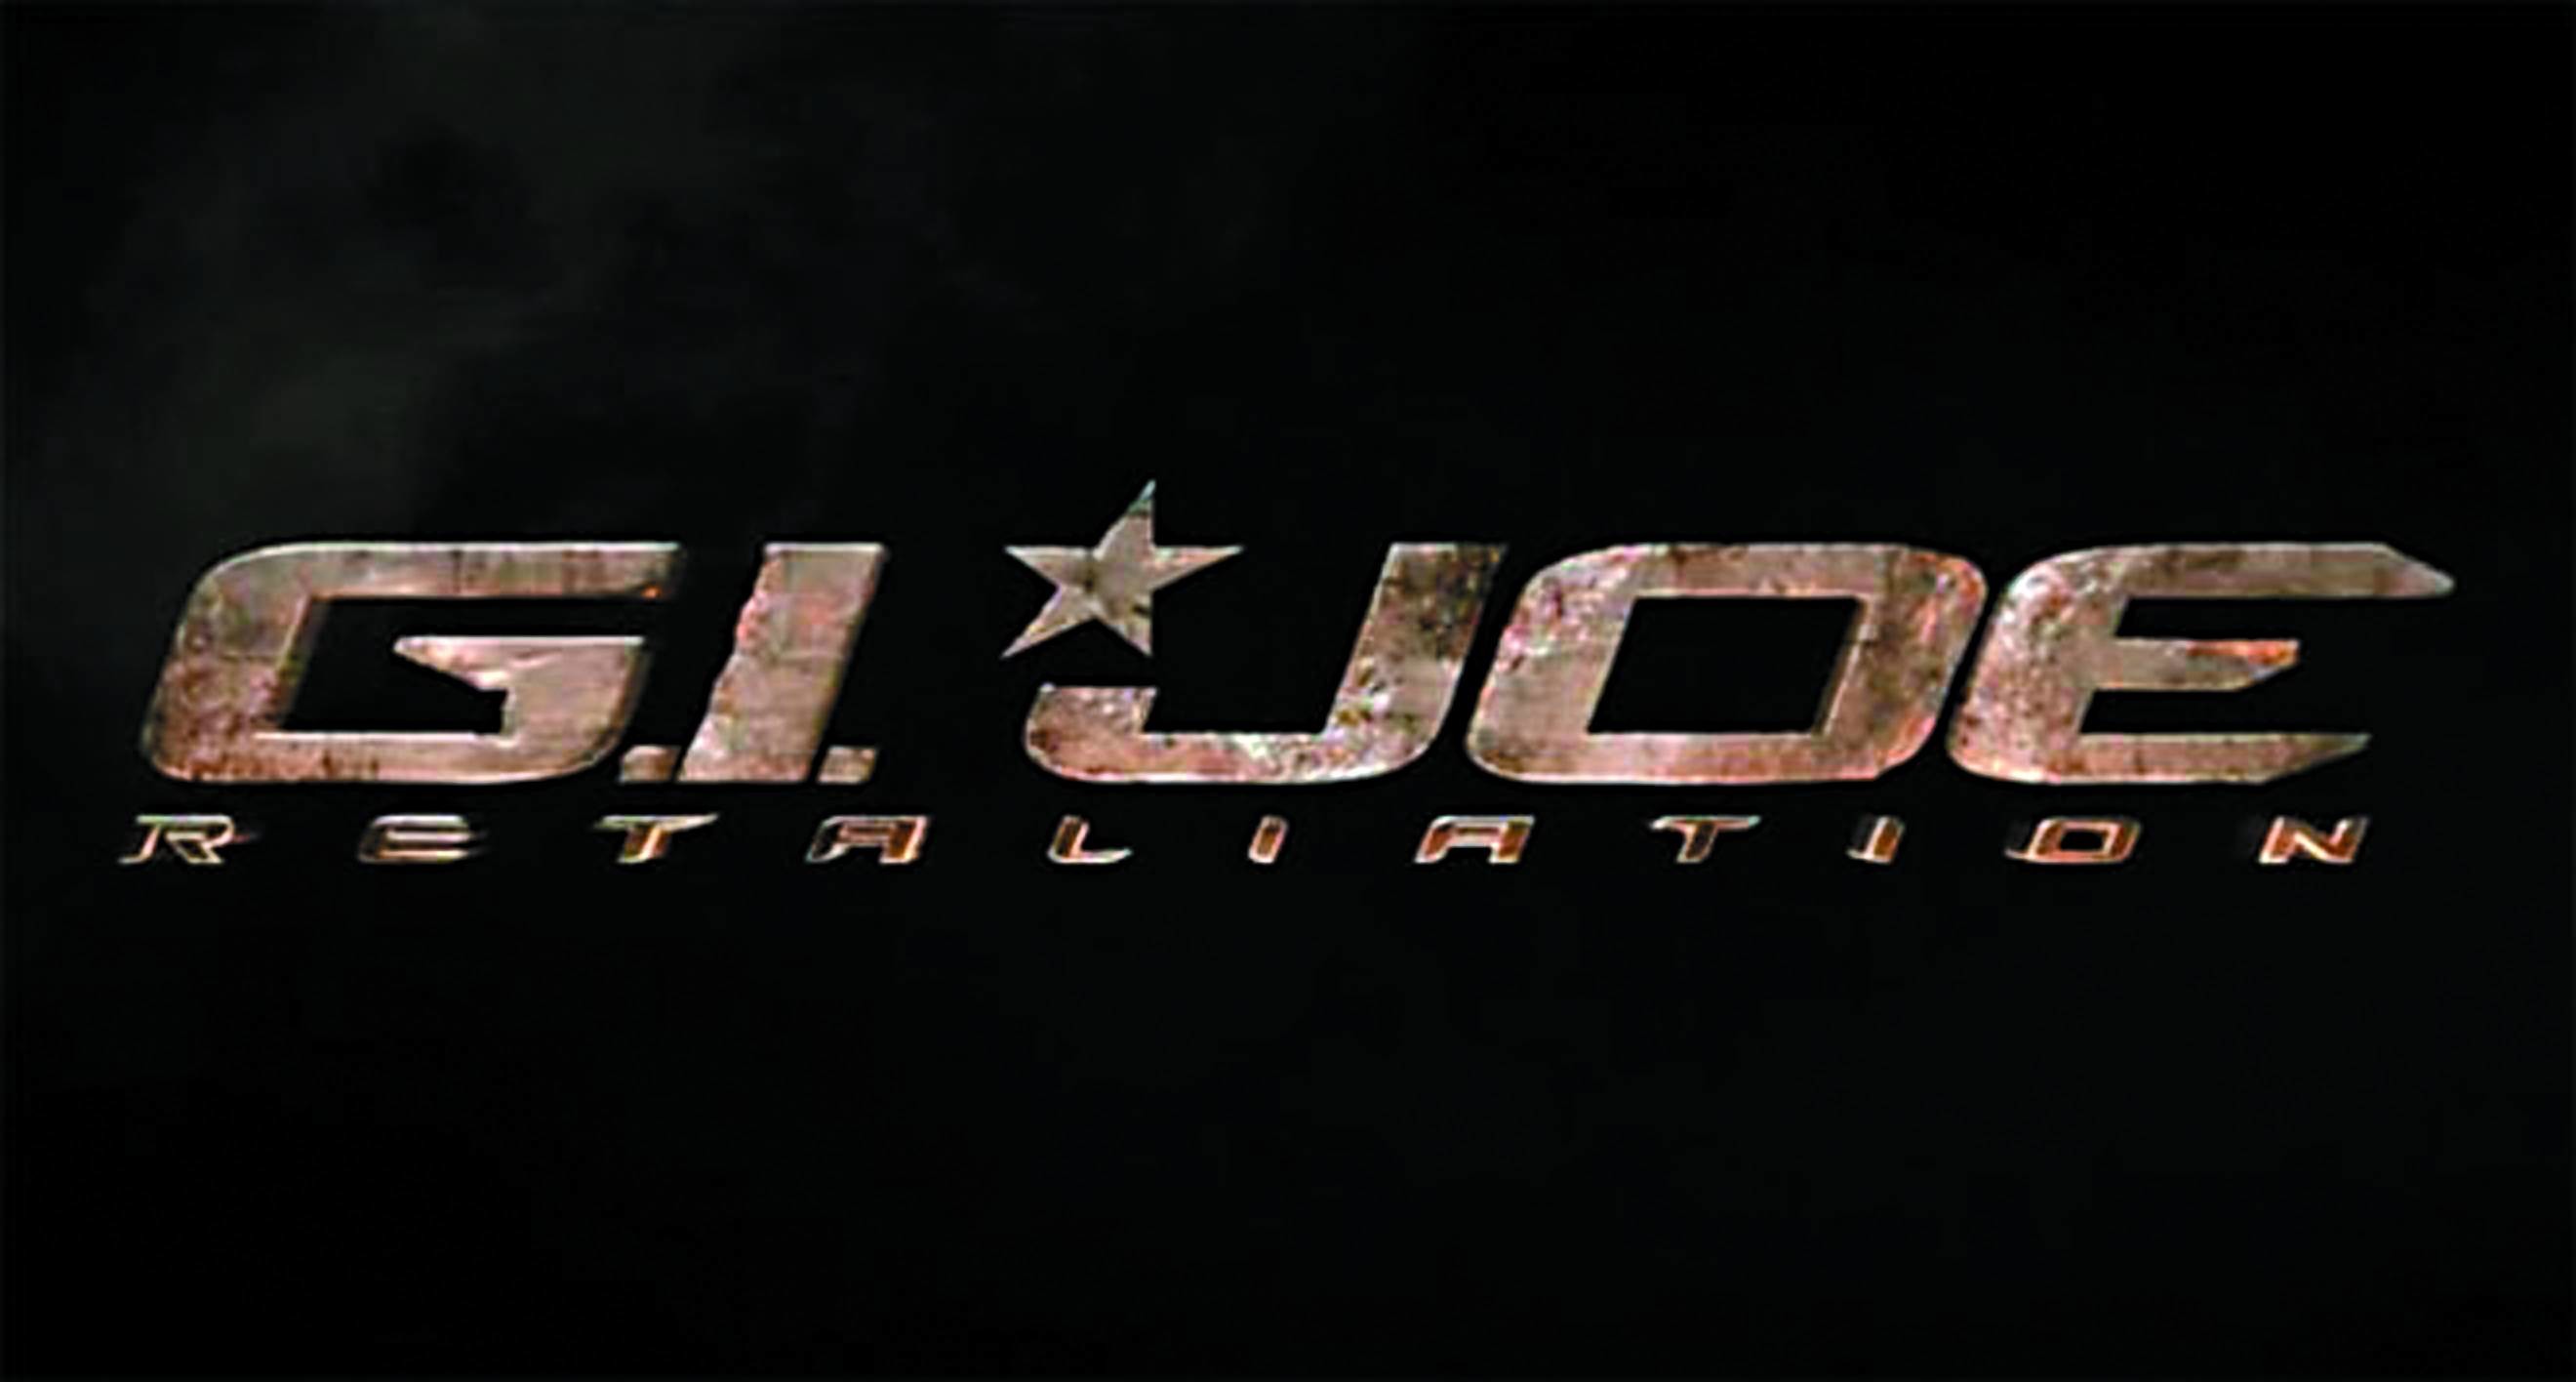 2640x1416 G. I. Joe: Retaliation Wallpaper and Backgrounds.  g_i_joe_retaliation_wallpaper_and_backgrounds_character_pictures_wallpapers_backgrounds  ...